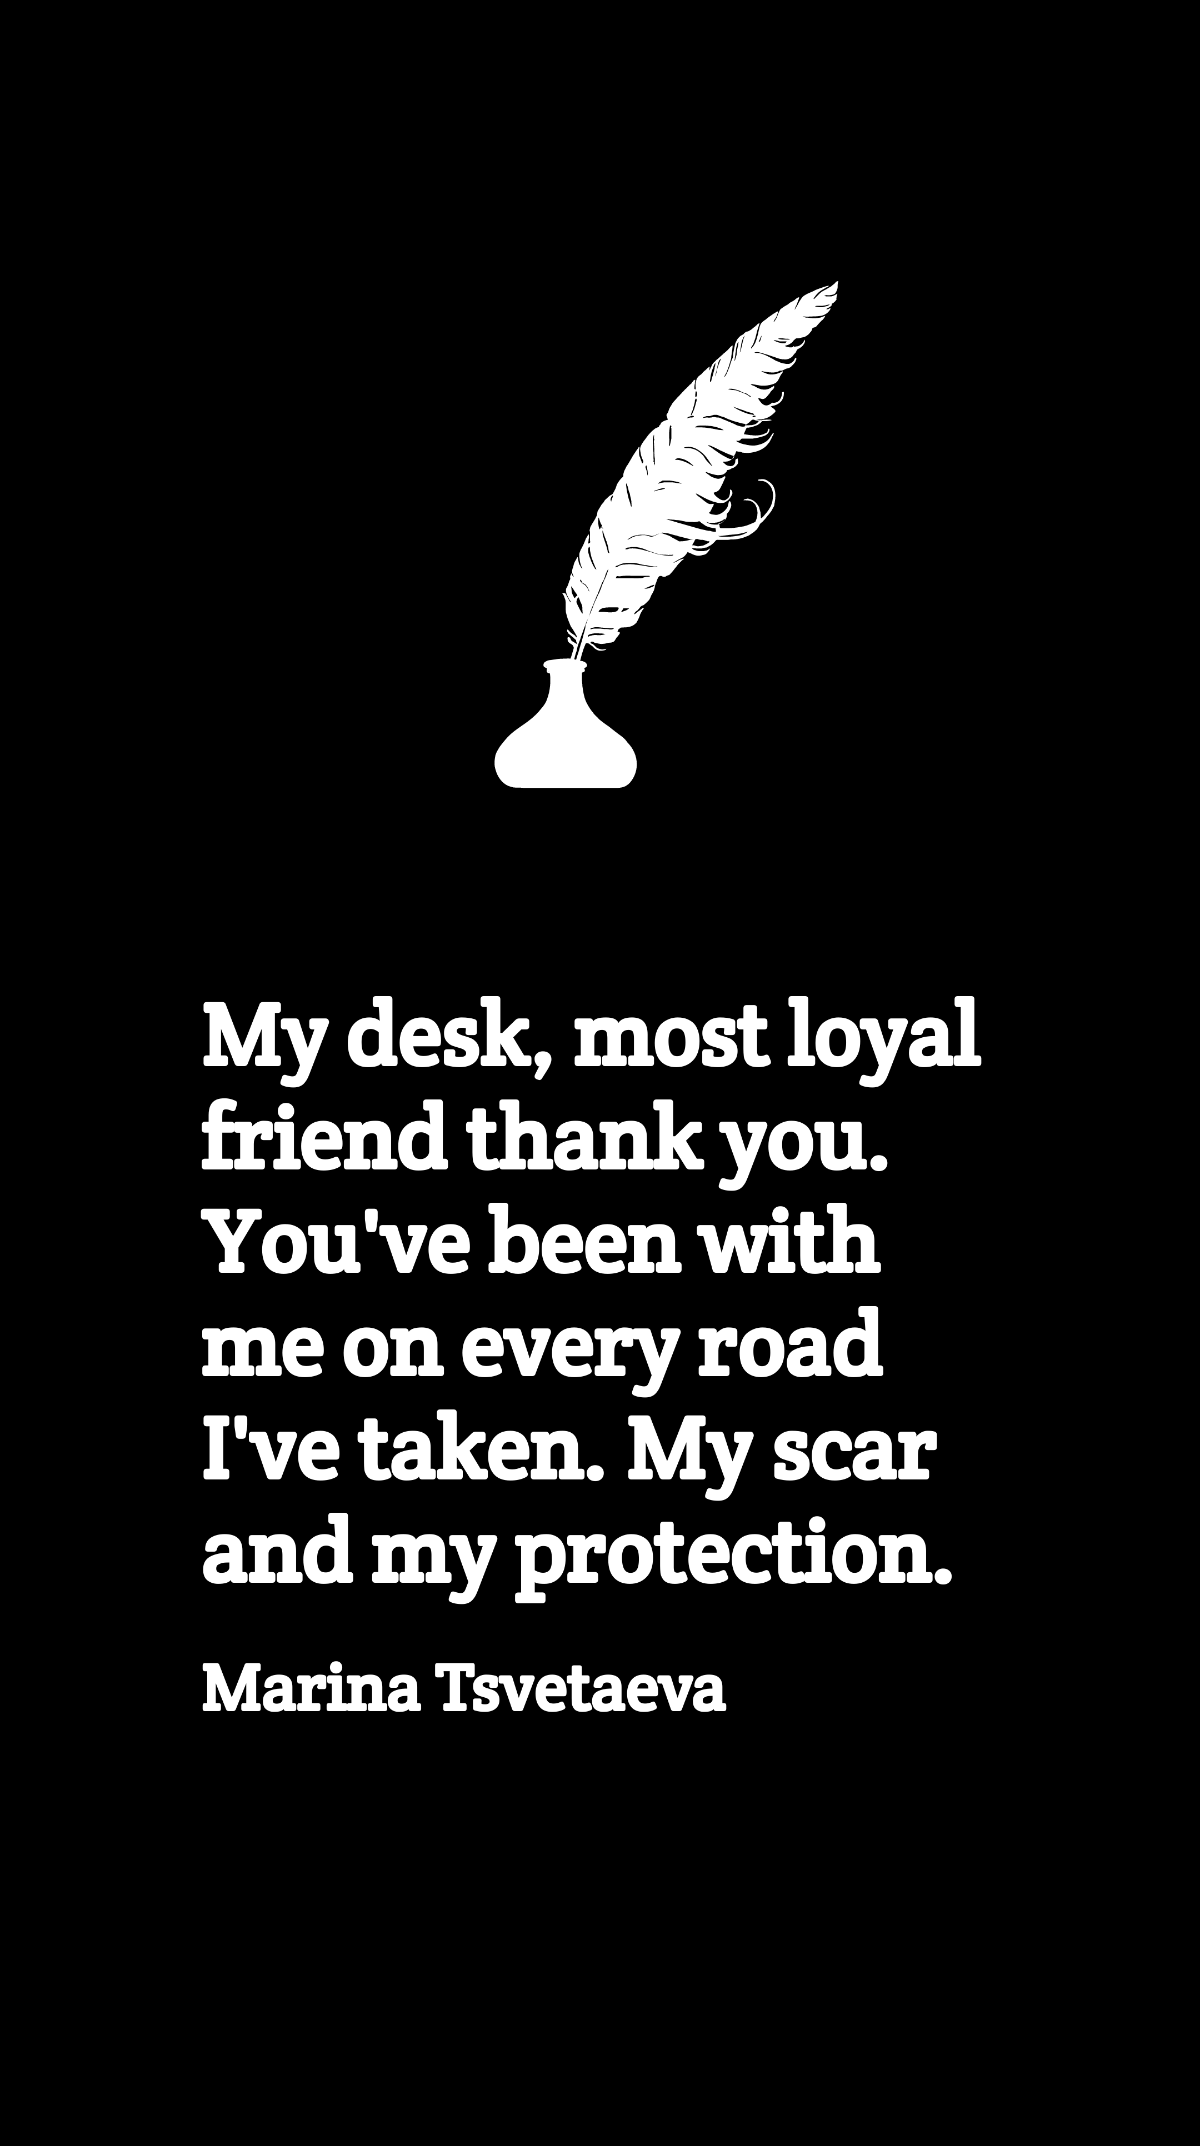 Marina Tsvetaeva - My desk, most loyal friend thank you. You've been with me on every road I've taken. My scar and my protection. Template